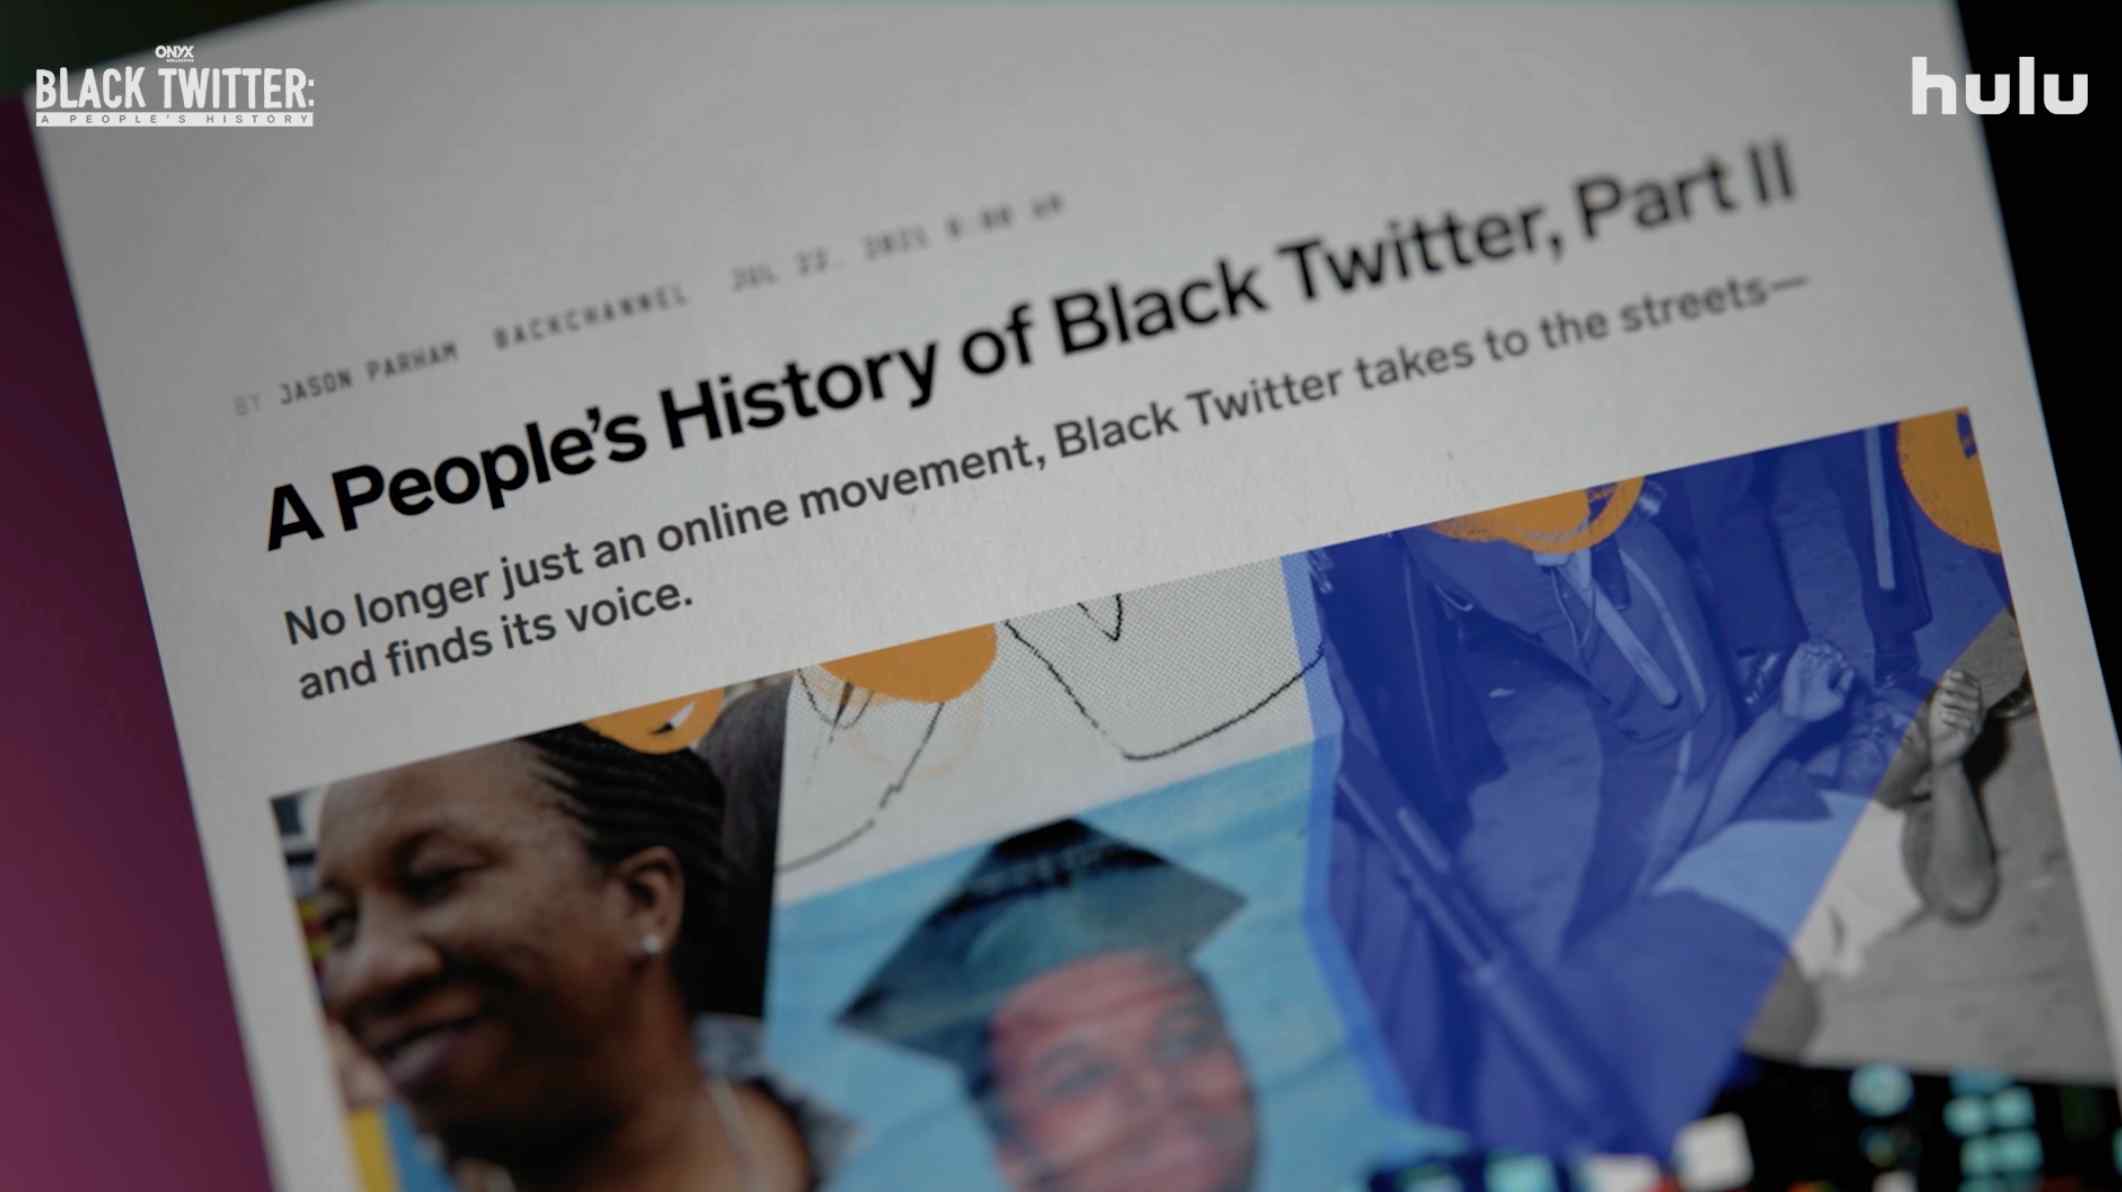 ‘Black Twitter: A People’s History’ Exclusive Highlights The Article Behind The New Hulu Docuseries